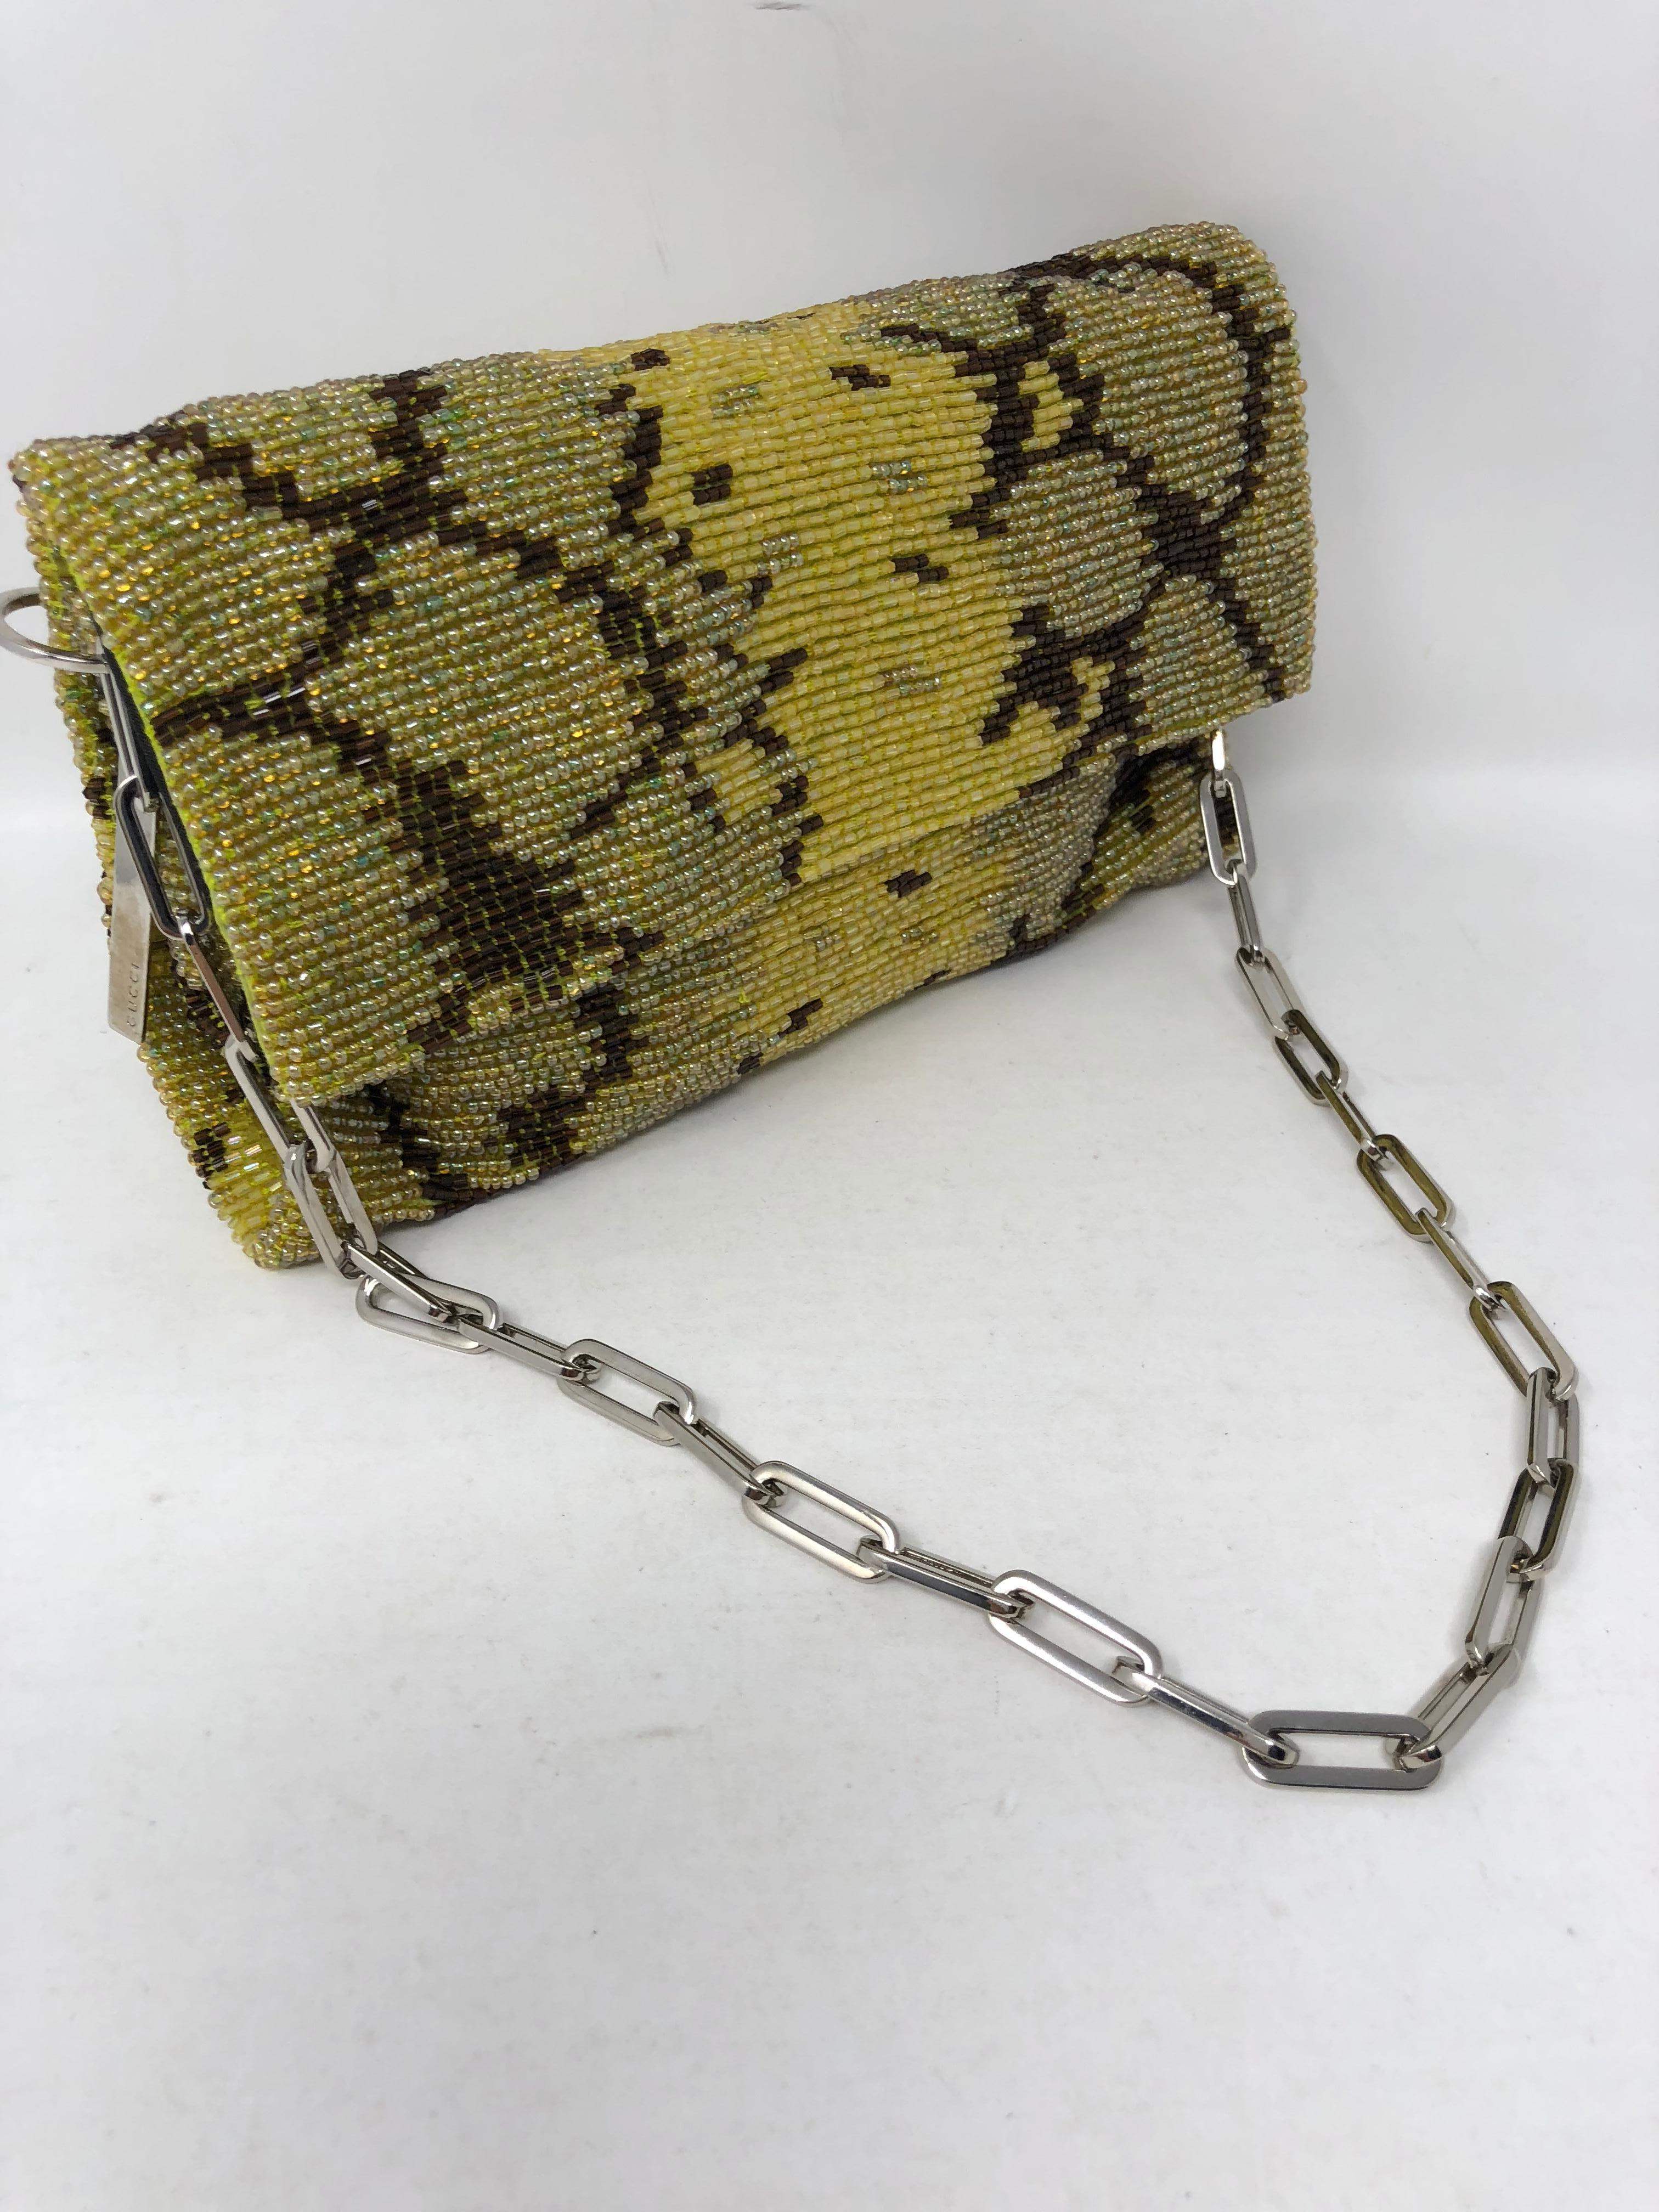 Gucci evening bag designed by Tom Ford. Handmade and beaded purse with exquisite details. The beading creates a snakeskin look. Can be worn as a shoulder bag or tucked in as a clutch. Brand new condition. Very limited and rare from a Collector.